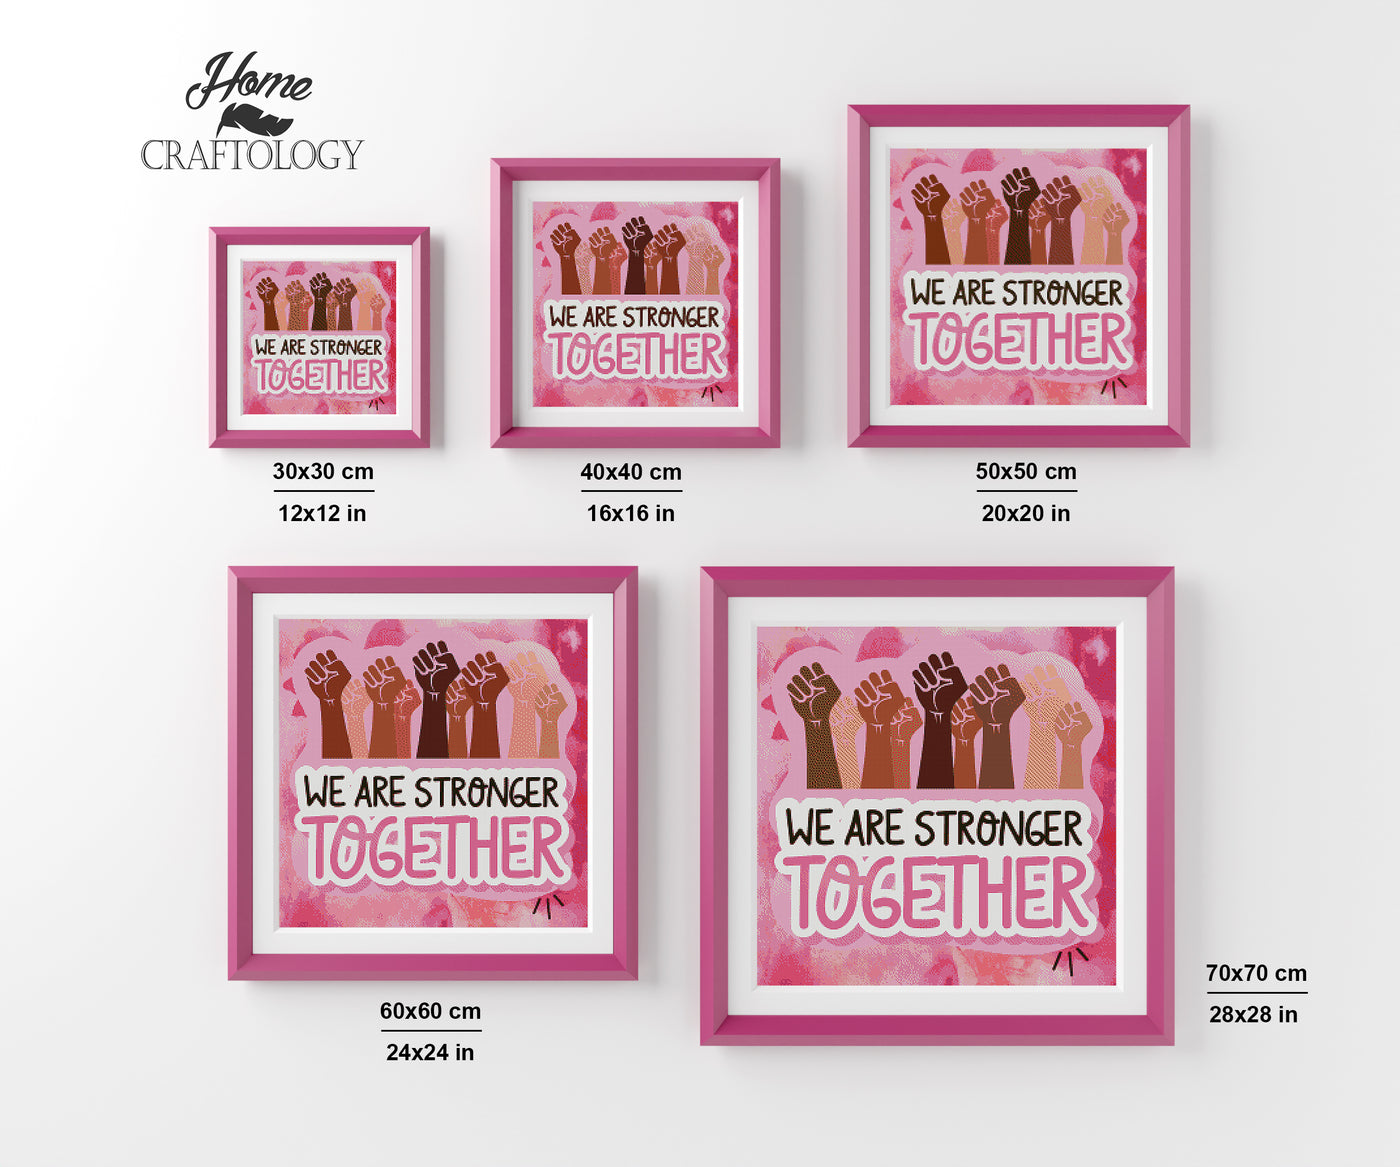 We are Stronger Together - Premium Diamond Painting Kit